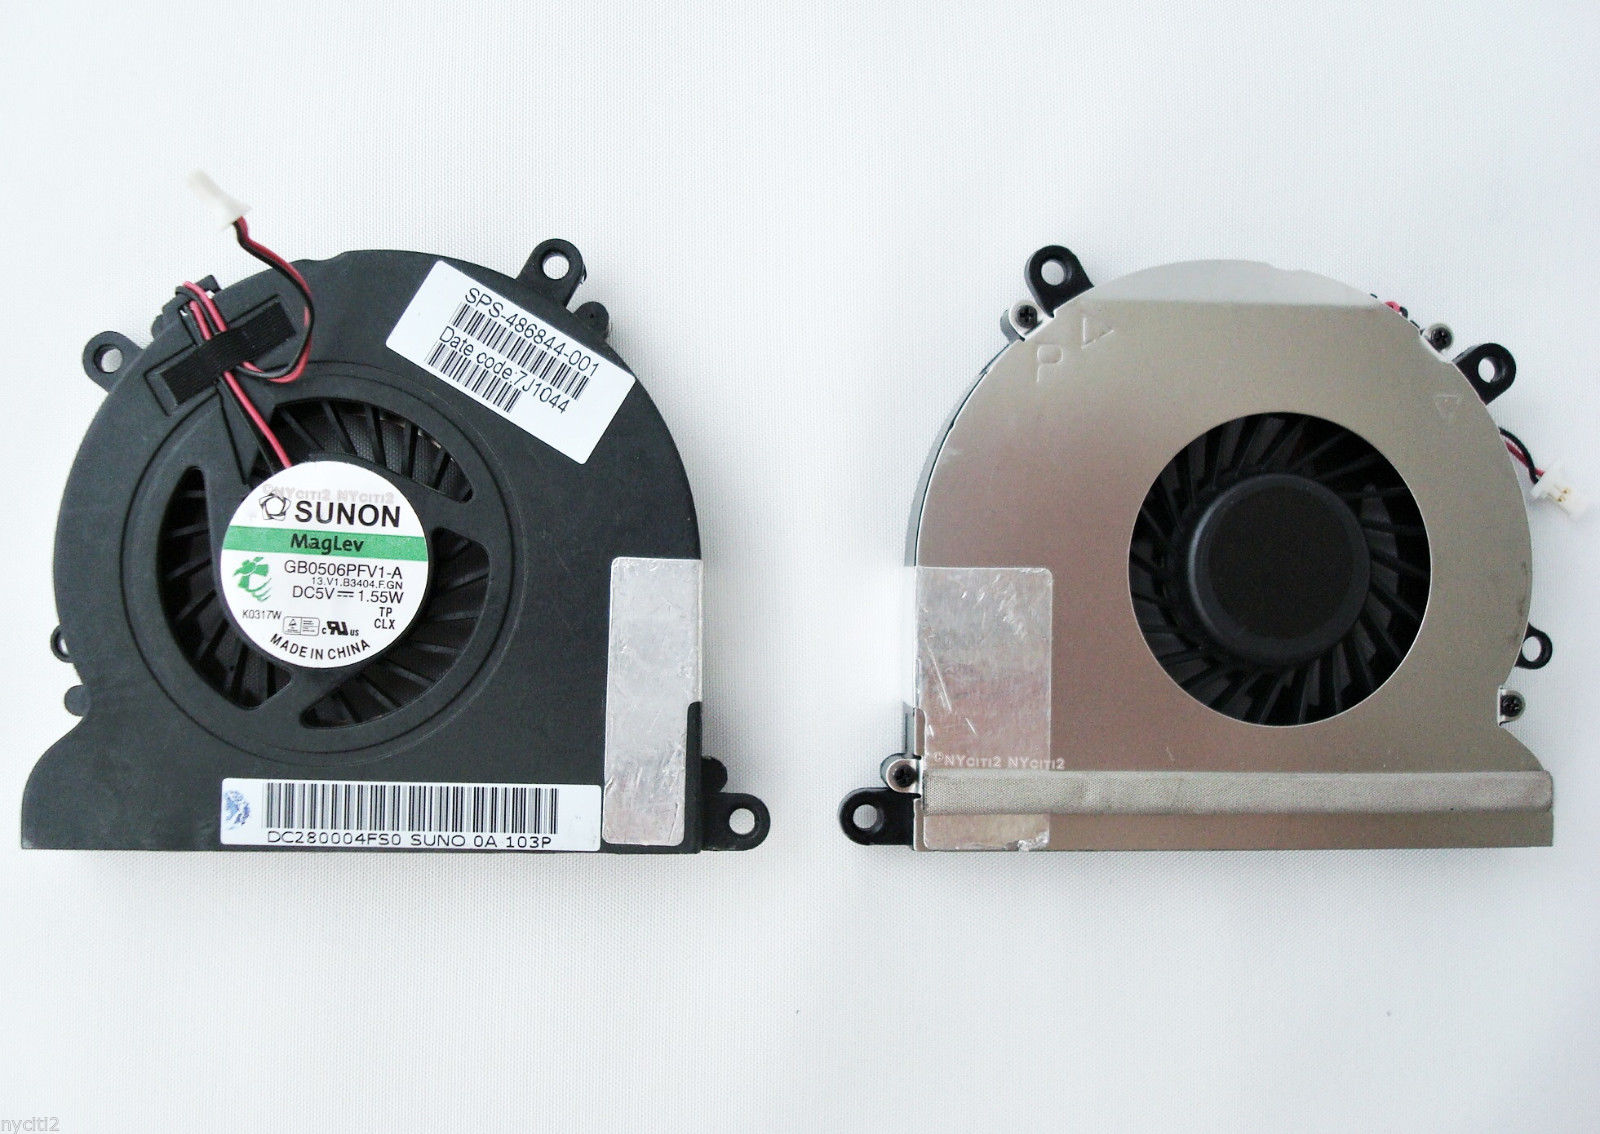 CPU Cooling Fan For HP Pavilion AB7205HX-GC1 JAL50 GB0506PFV1-A - Click Image to Close